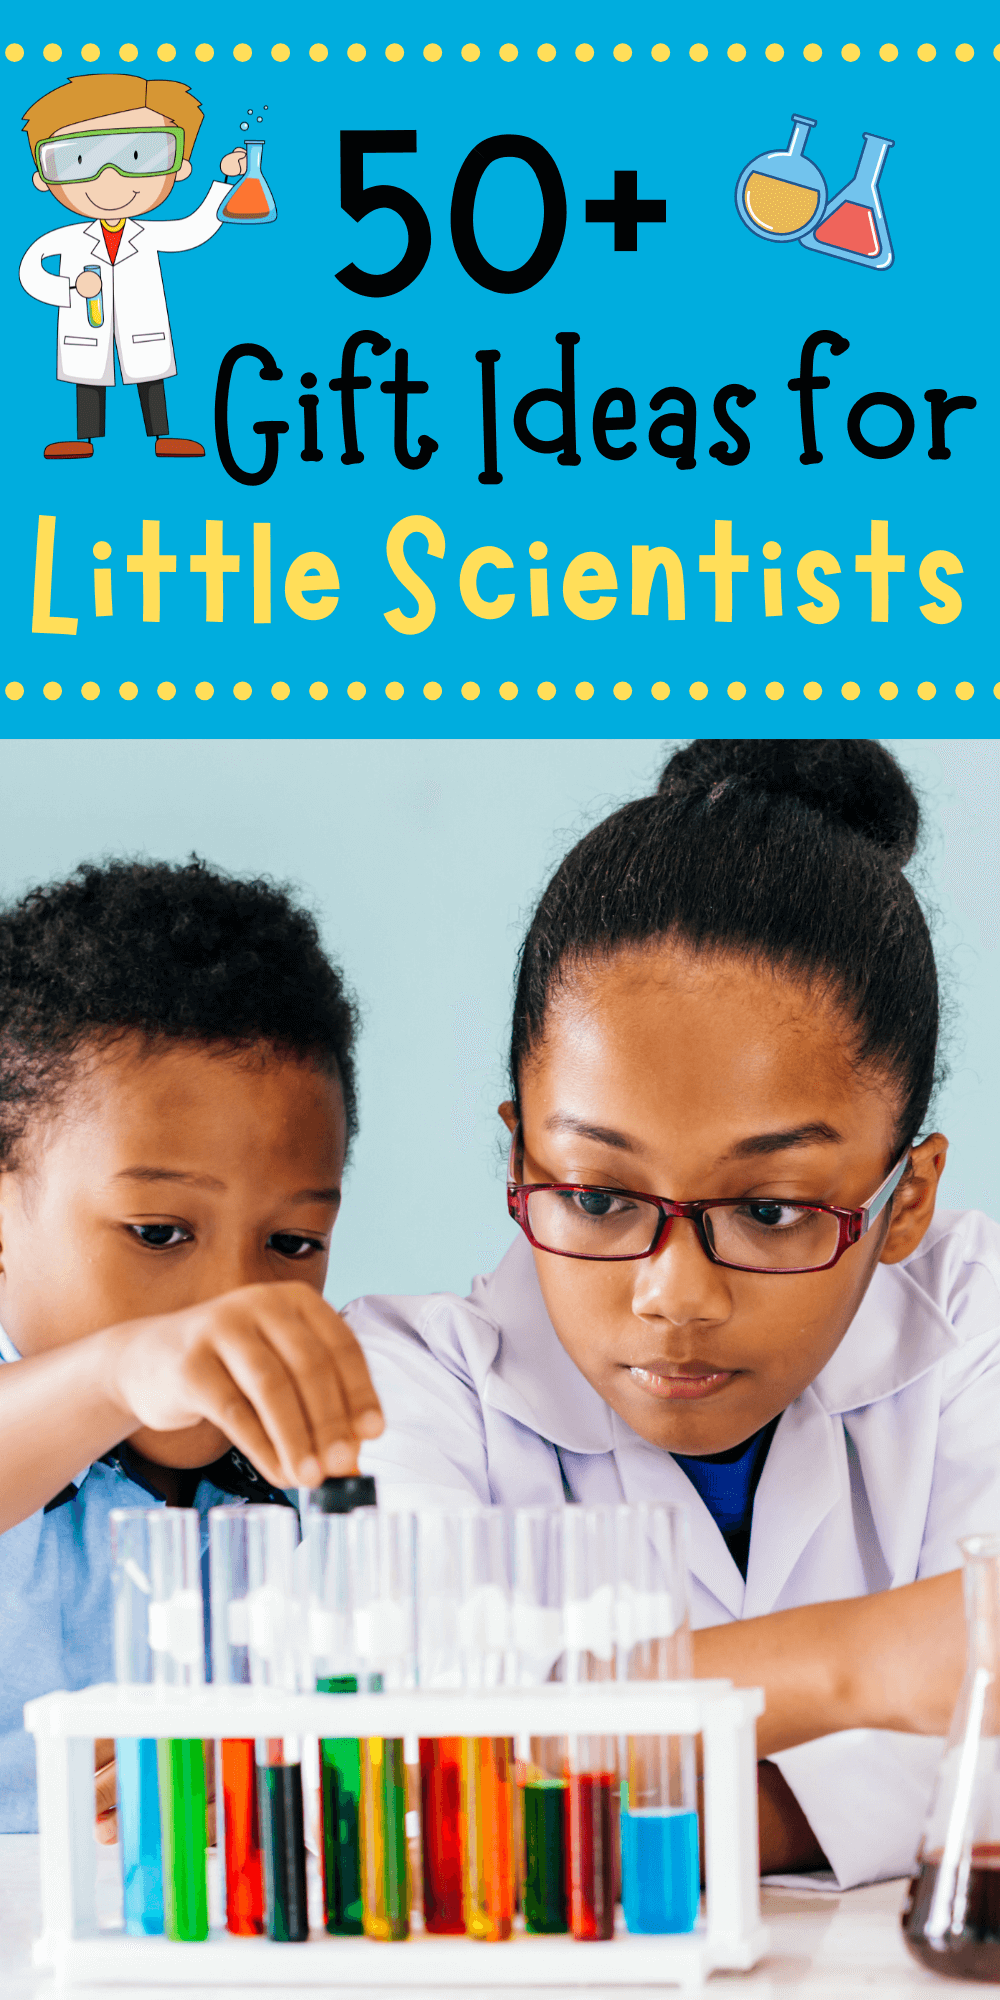 Must have gifts to encourage your kids to love science are perfect for your little scientists #holidaygifts #giftguides #giftideas #sciencegifts #stemgifts #giftstoencouragescience #giftsforstem